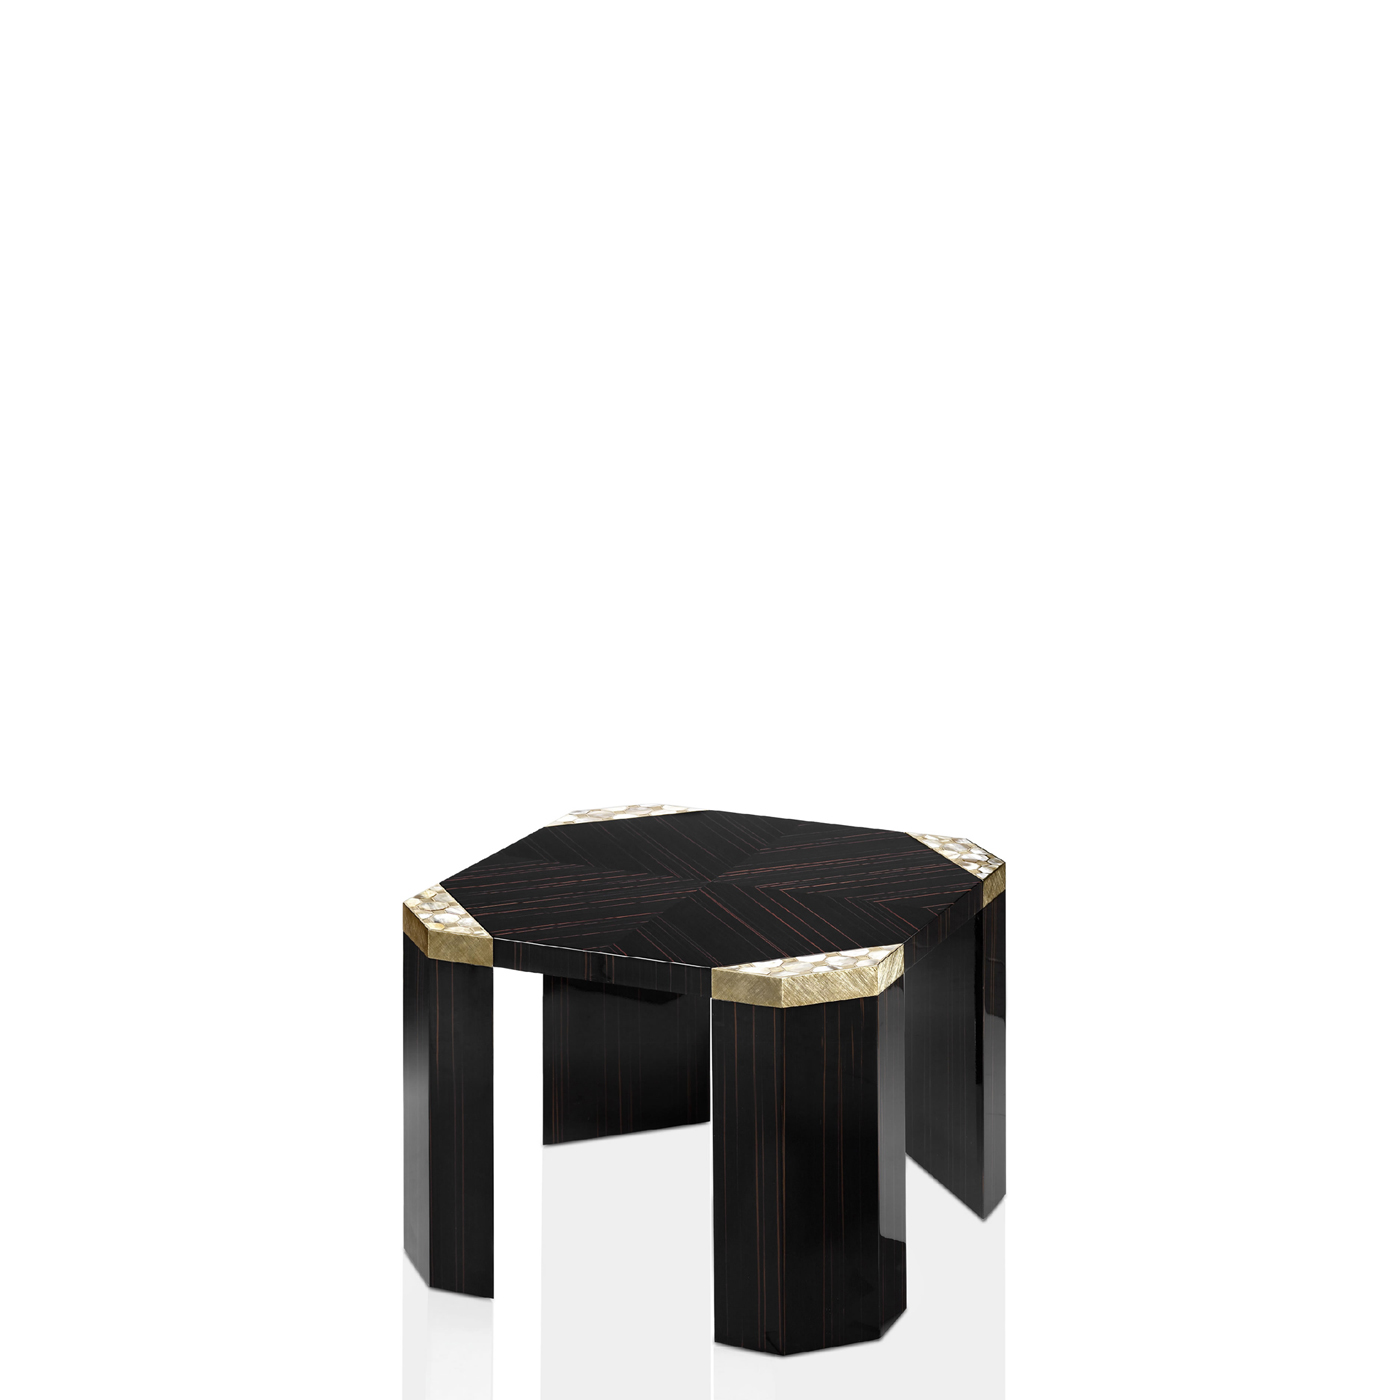 Tables and console tables - Ercolano side table in glossy ebony and horn - Arcahorn